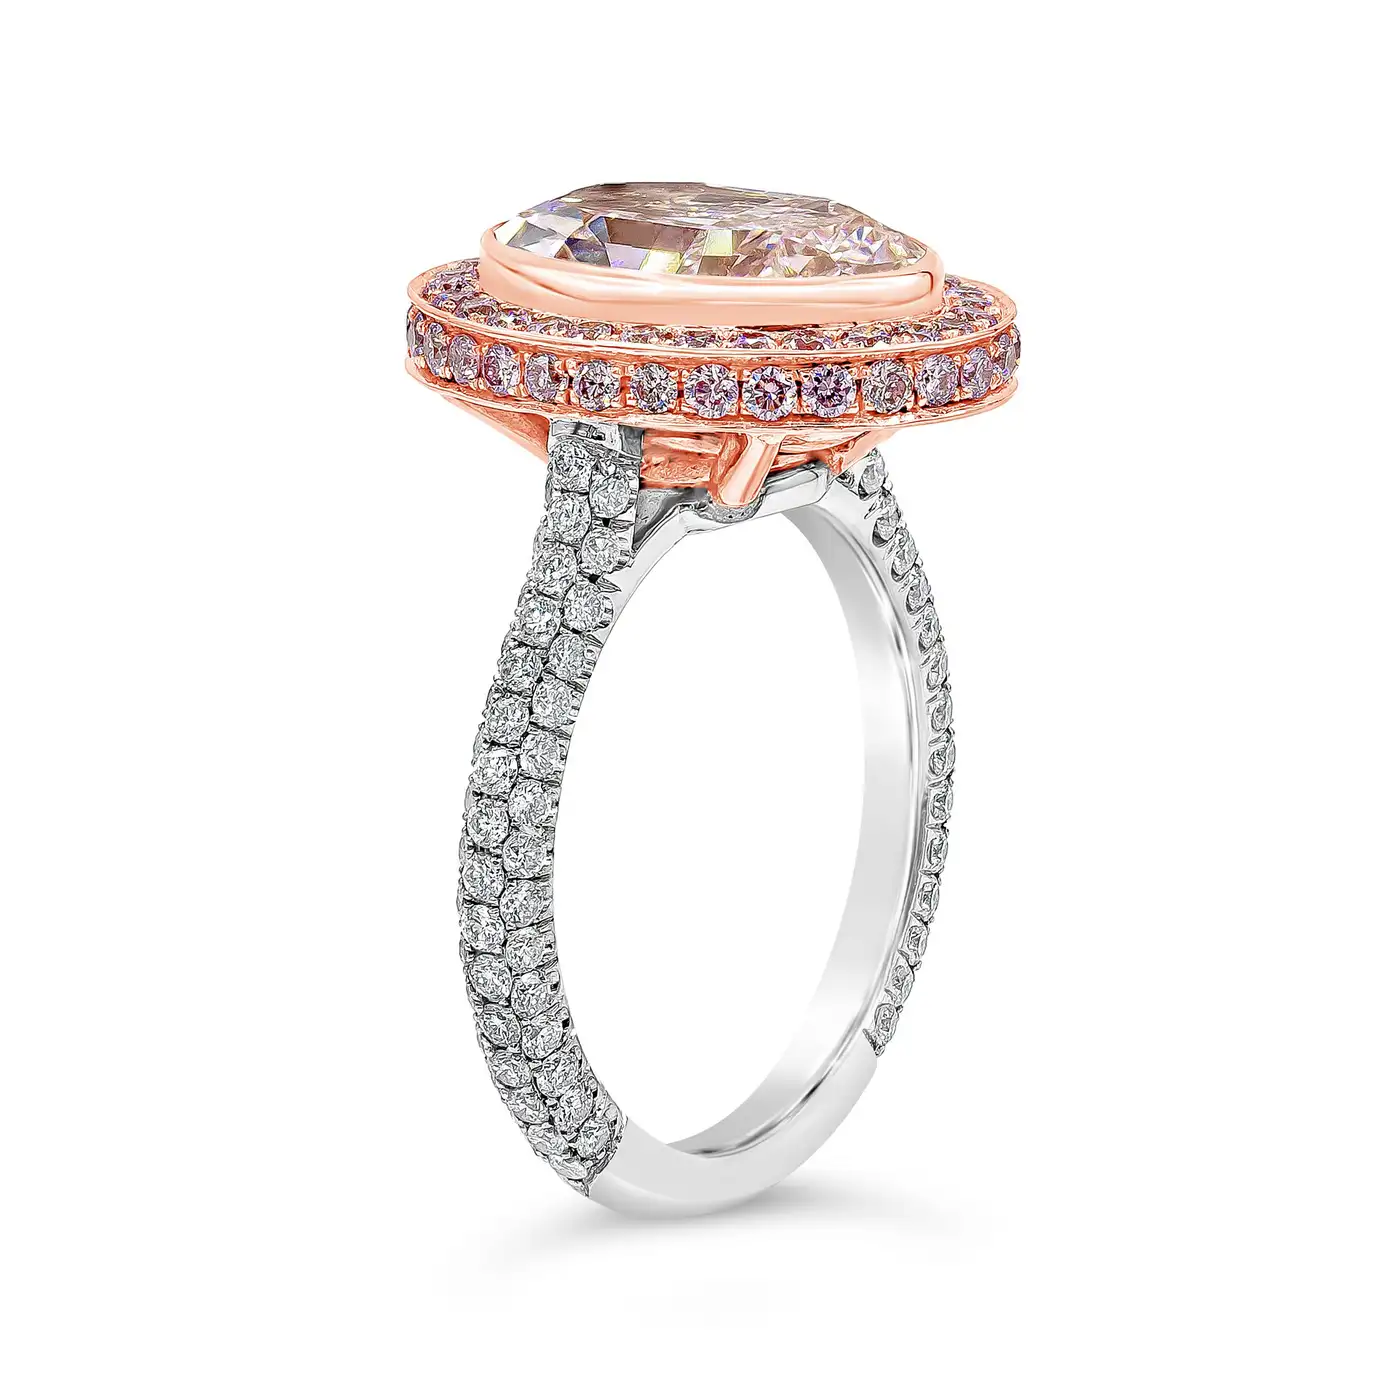 3.66-Oval-Cut-Fancy-Light-Pink-Diamond-Halo-Engagement-Ring-GIA-Certified-4.webp